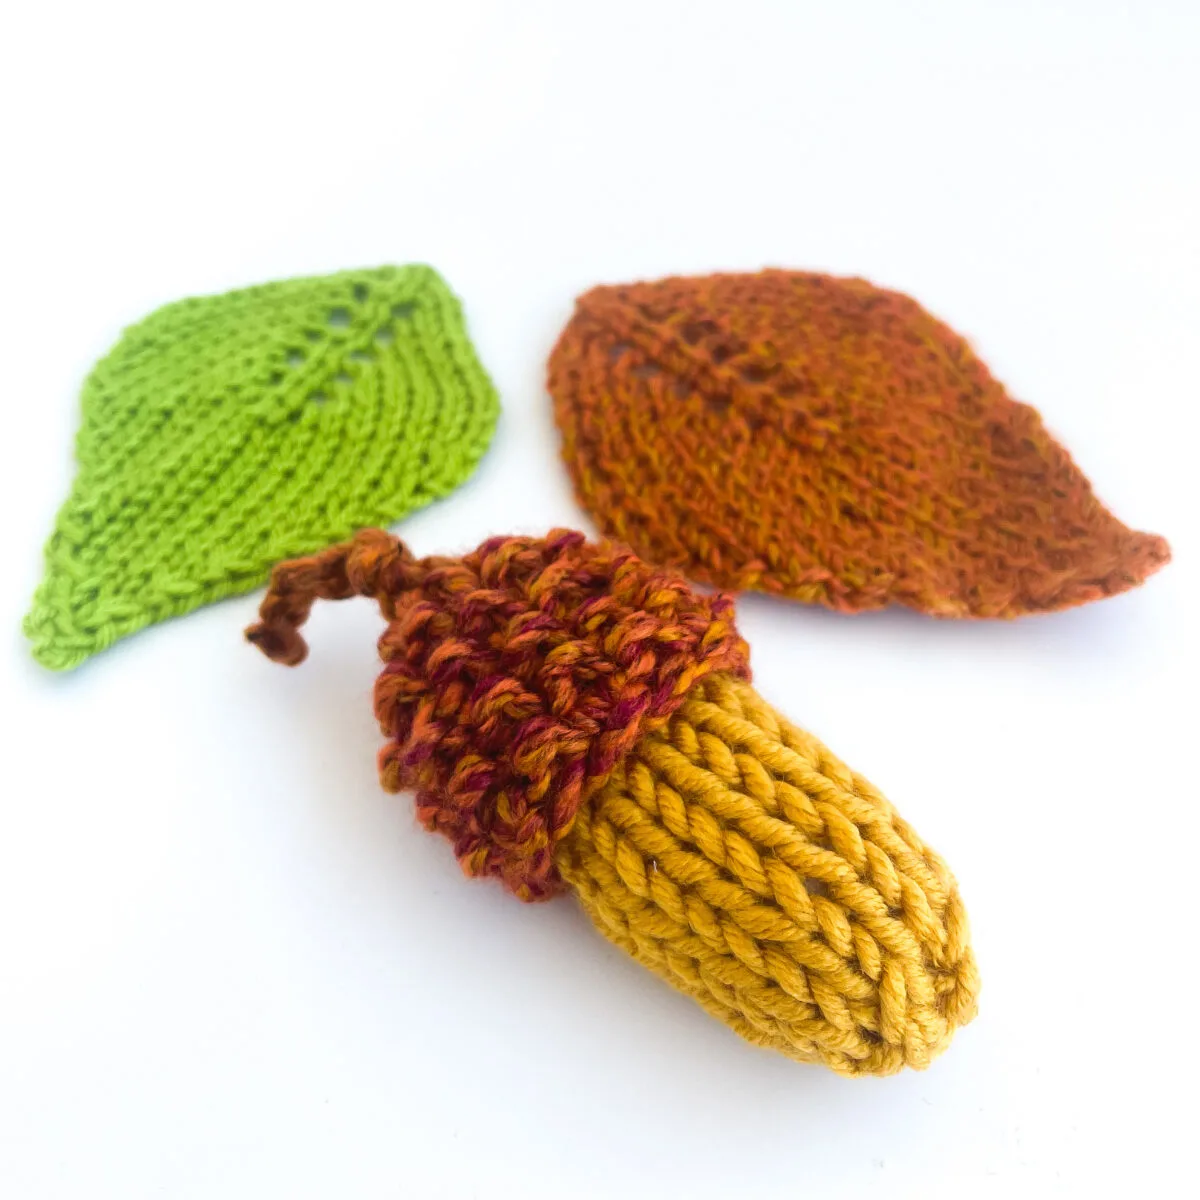 Knitted acorn with two knitted leaves.